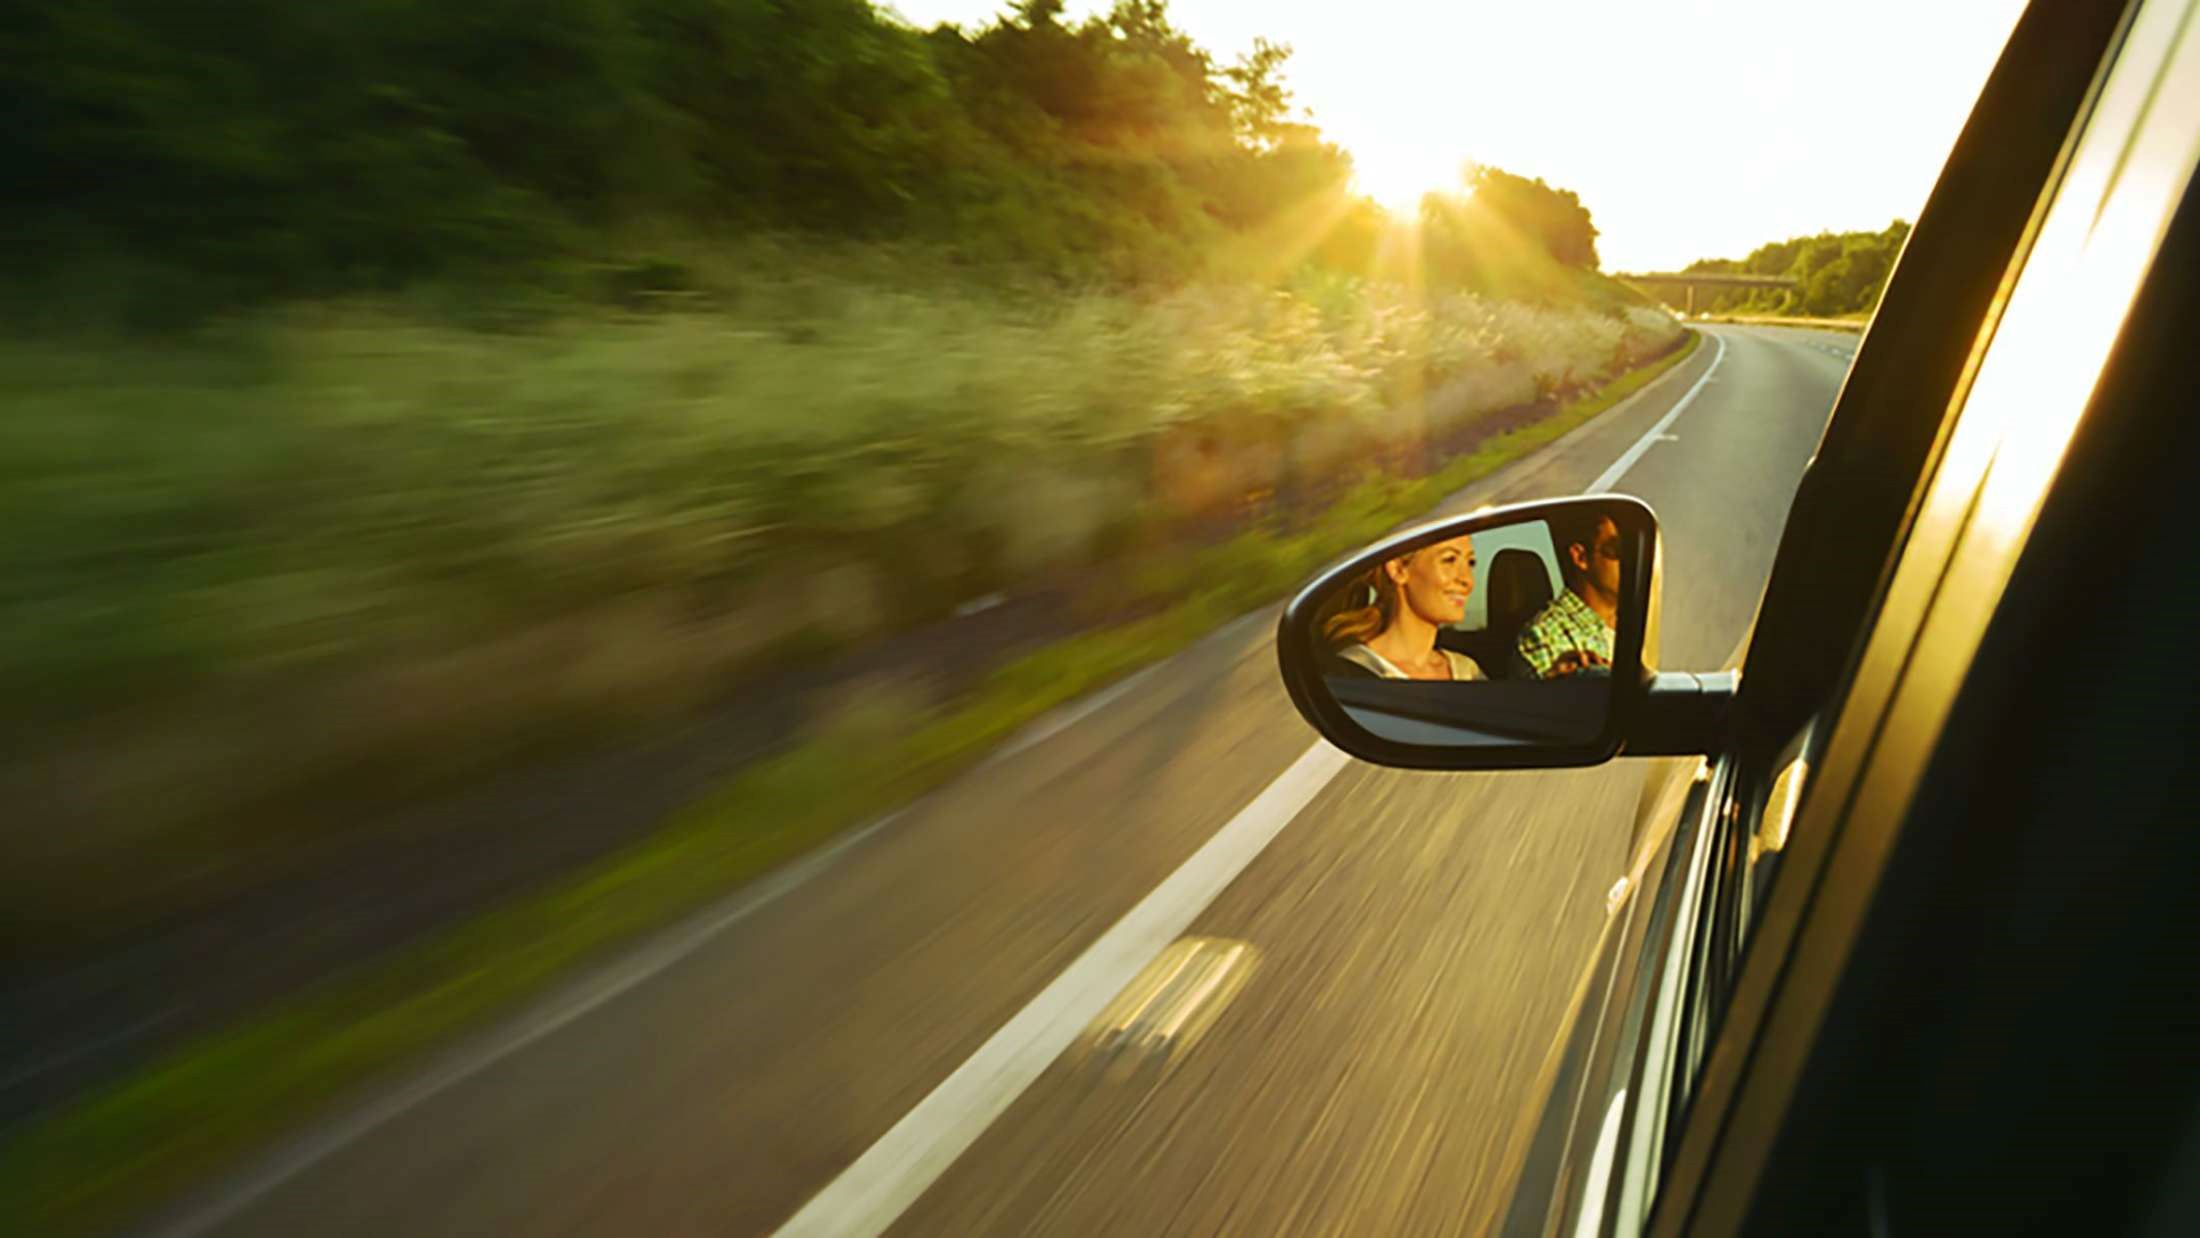 Car driving down road on a sunny evening with couple visible in the reflection of the left wing mirror